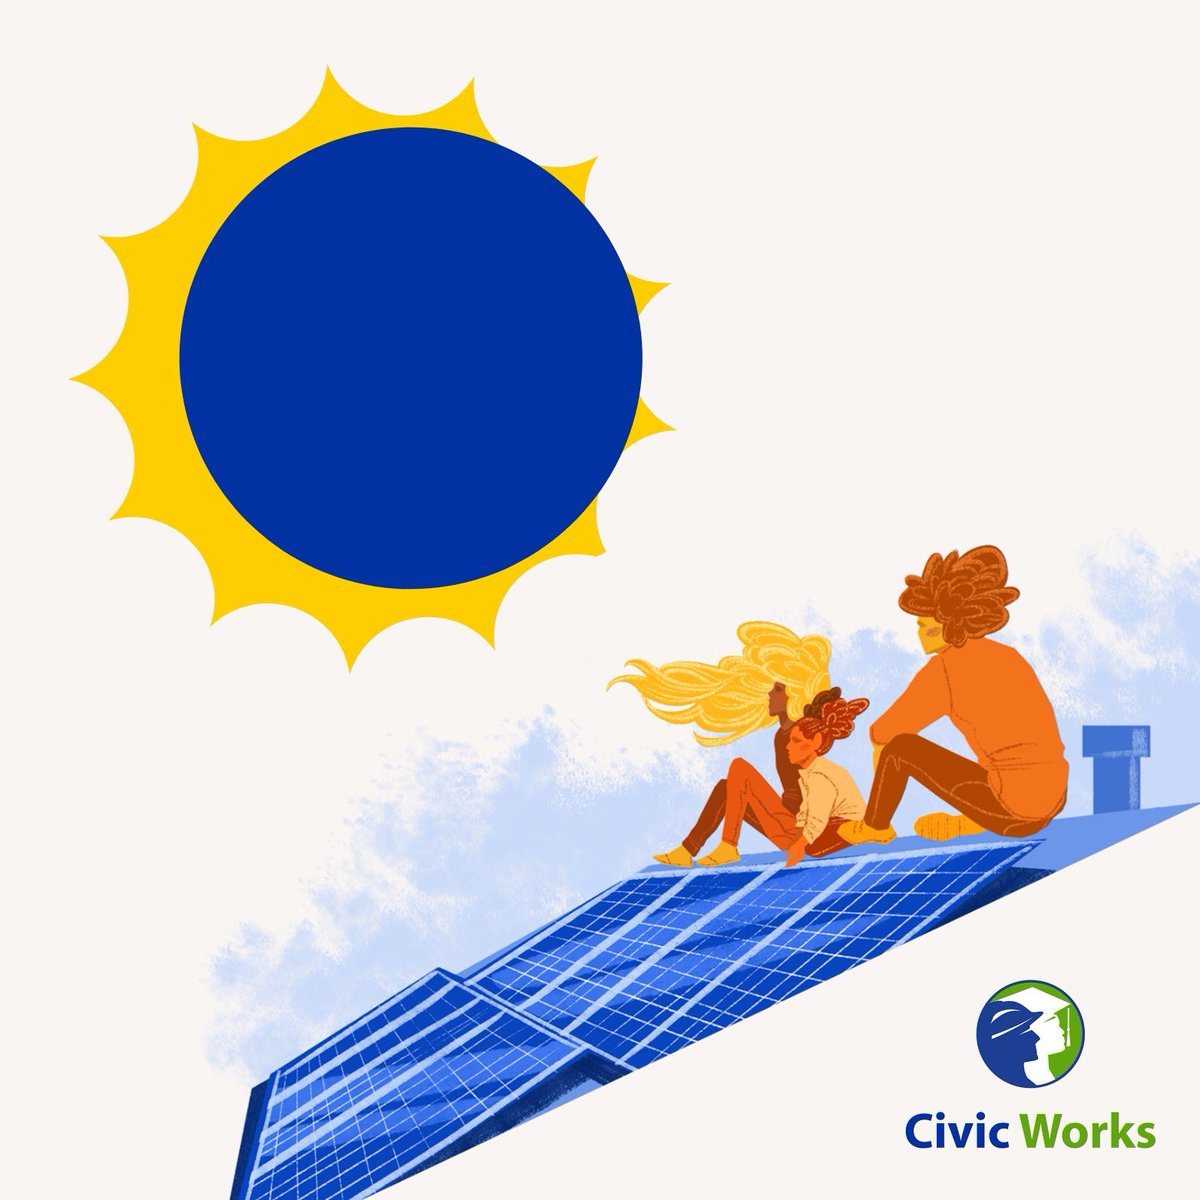 Enjoy your day and let GOING SOLAR have a total eclipse of your heart! 🌘❤️ Save energy and spread love to your environment and community! 🌞 Visit our Linktree for more info: linktr.ee/civicworks Be safe today and remember not to look directly into the sun 😎